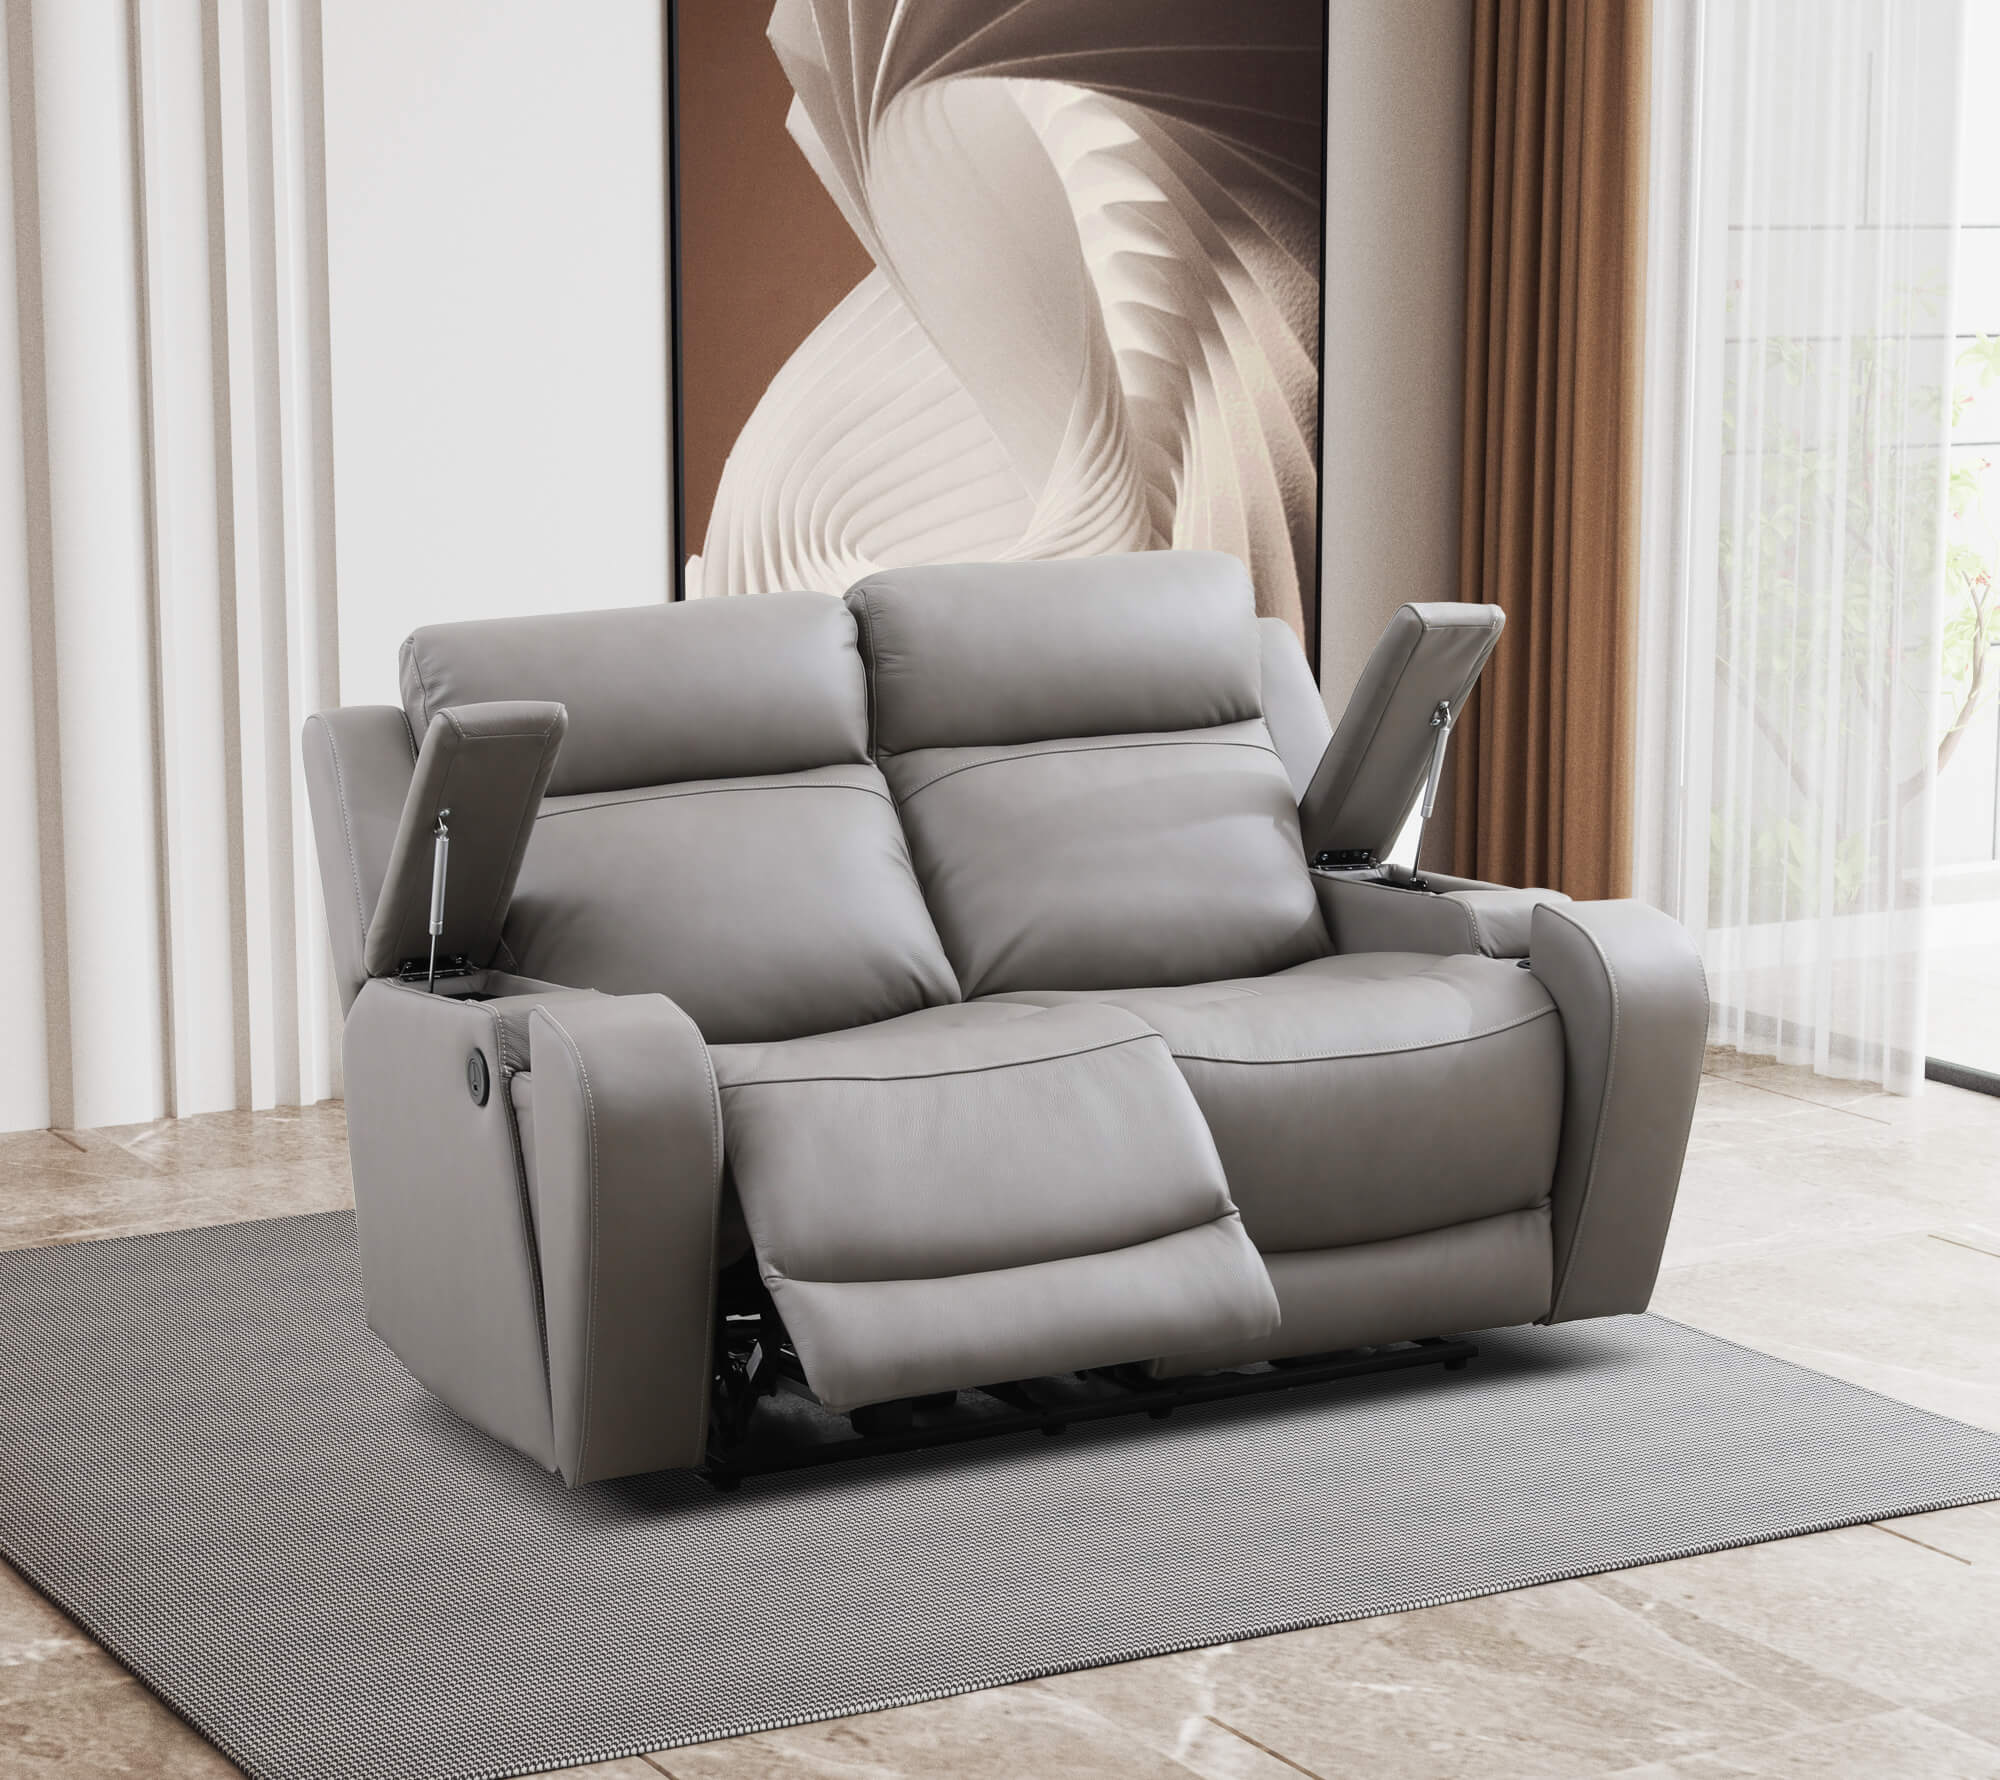 Jessie Home Theater Recliner Leather Sofa | COMFY